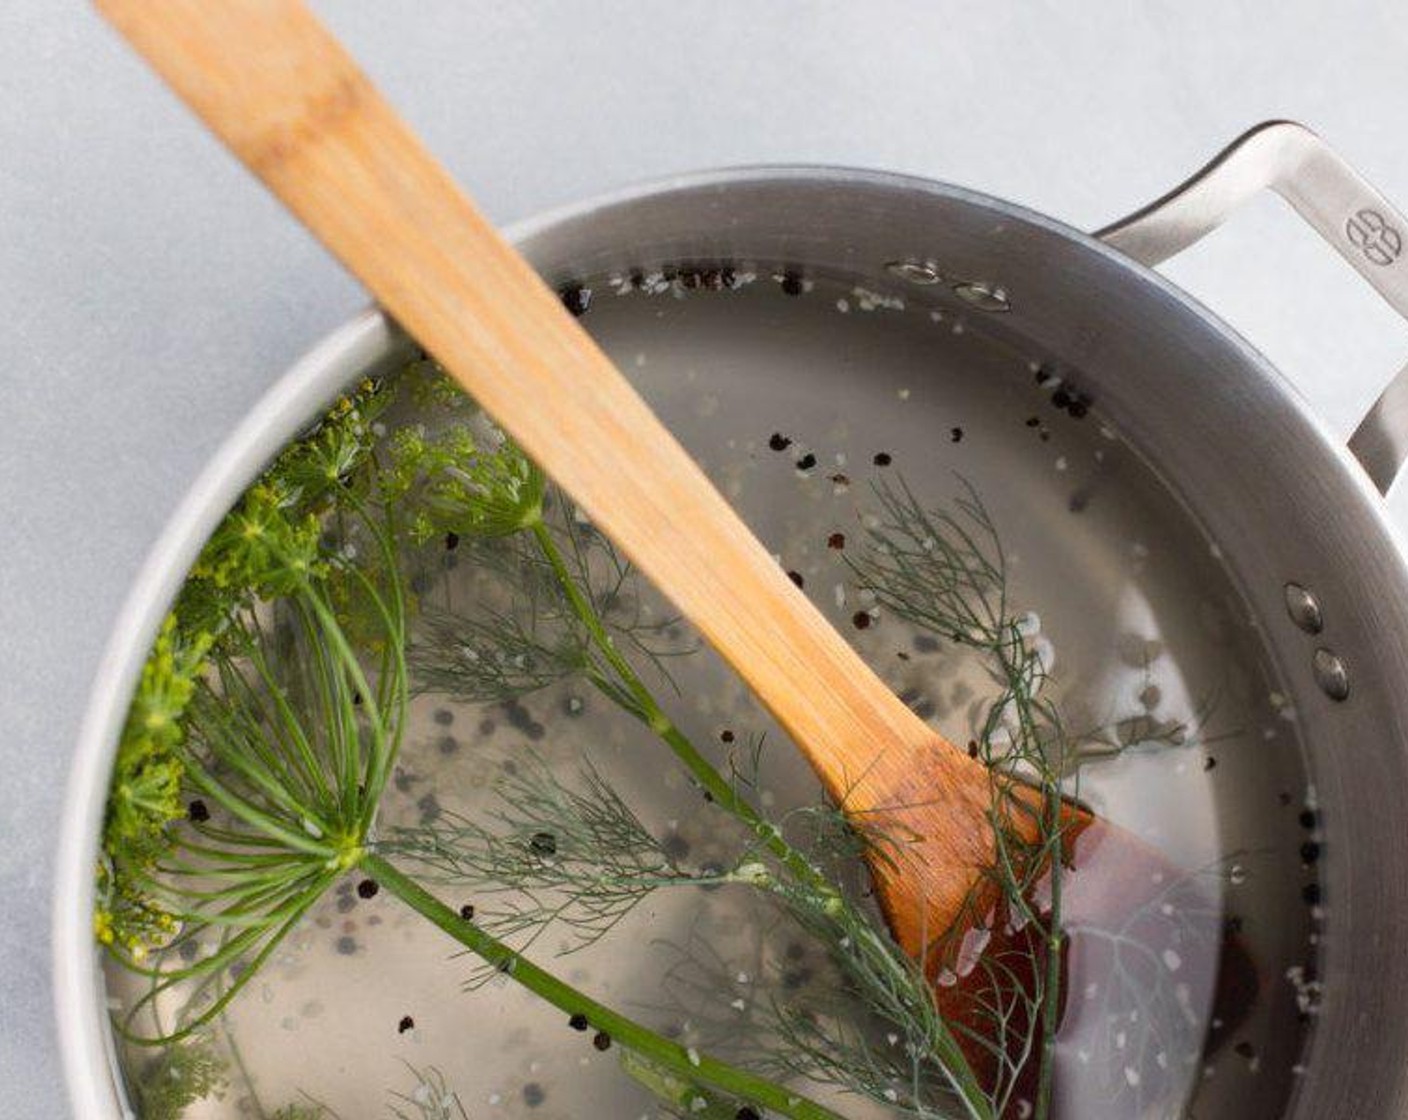 step 3 Combine Water (6 cups), Distilled White Vinegar (2 cups), Granulated Sugar (1 Tbsp), Salt (1 Tbsp), Garlic (1 Tbsp), Fresh Dill (1 sprig), and Peppercorns (1 tsp) in a large pot and bring to a rolling boil. Remove from heat.